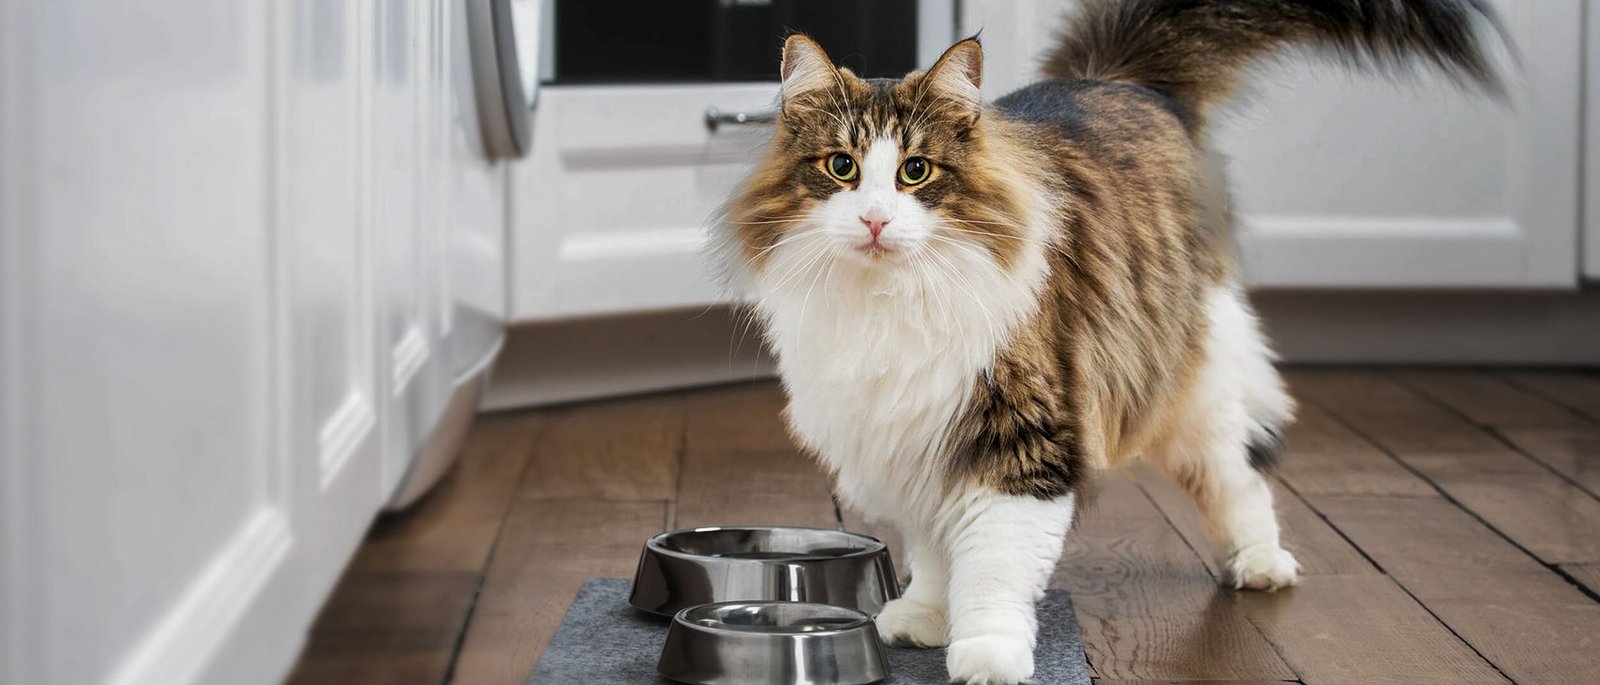 Diet for long-haired cat